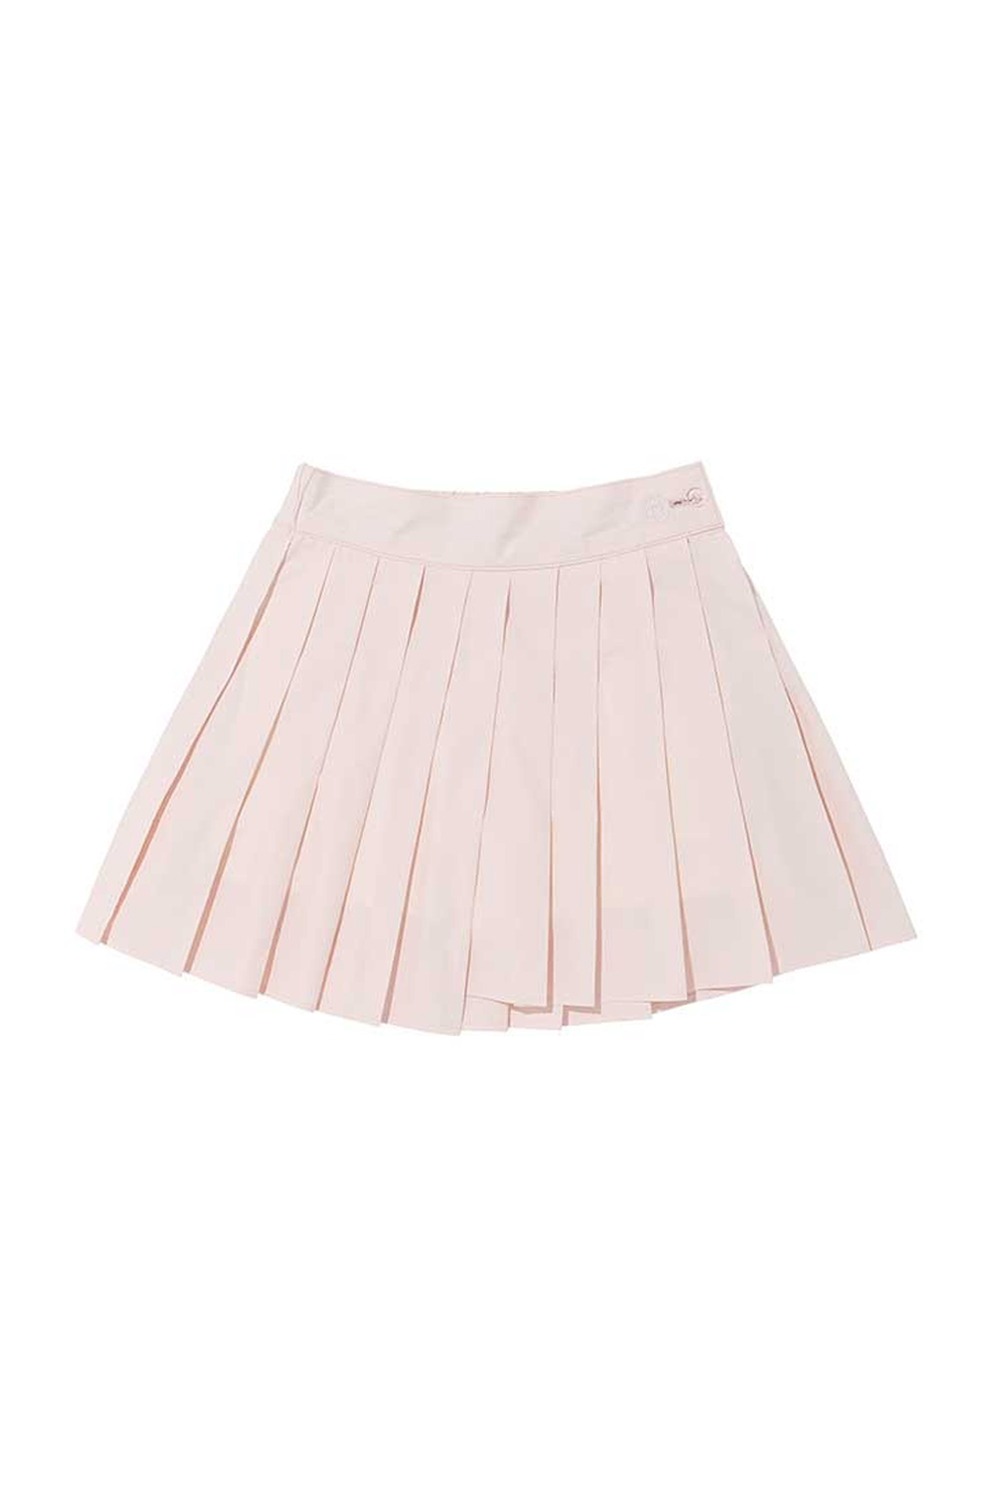 LOVEFORTY UNBALNCED PLEATED SKIRT (PINK) RICHEZ